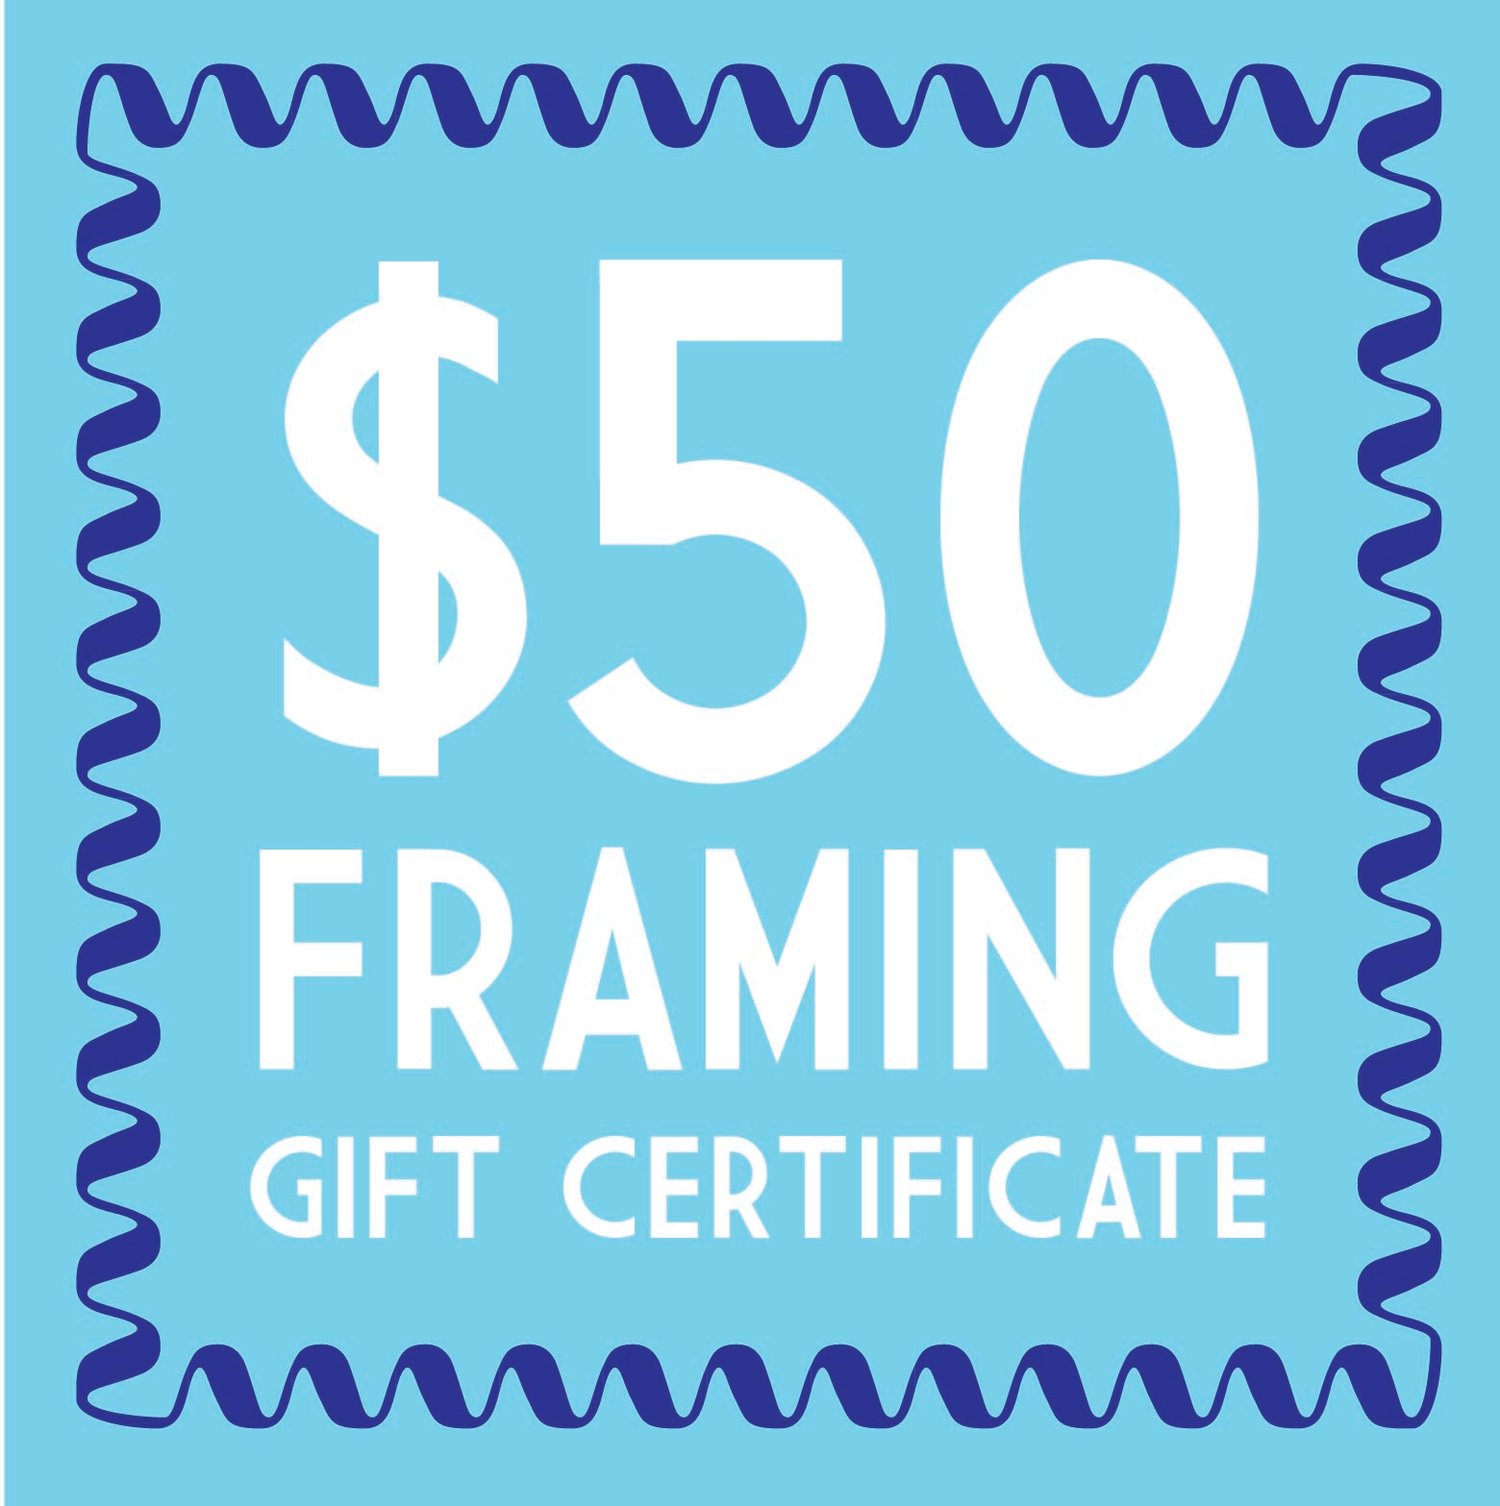 Image of $50 Trinity Framing Gift Certificate